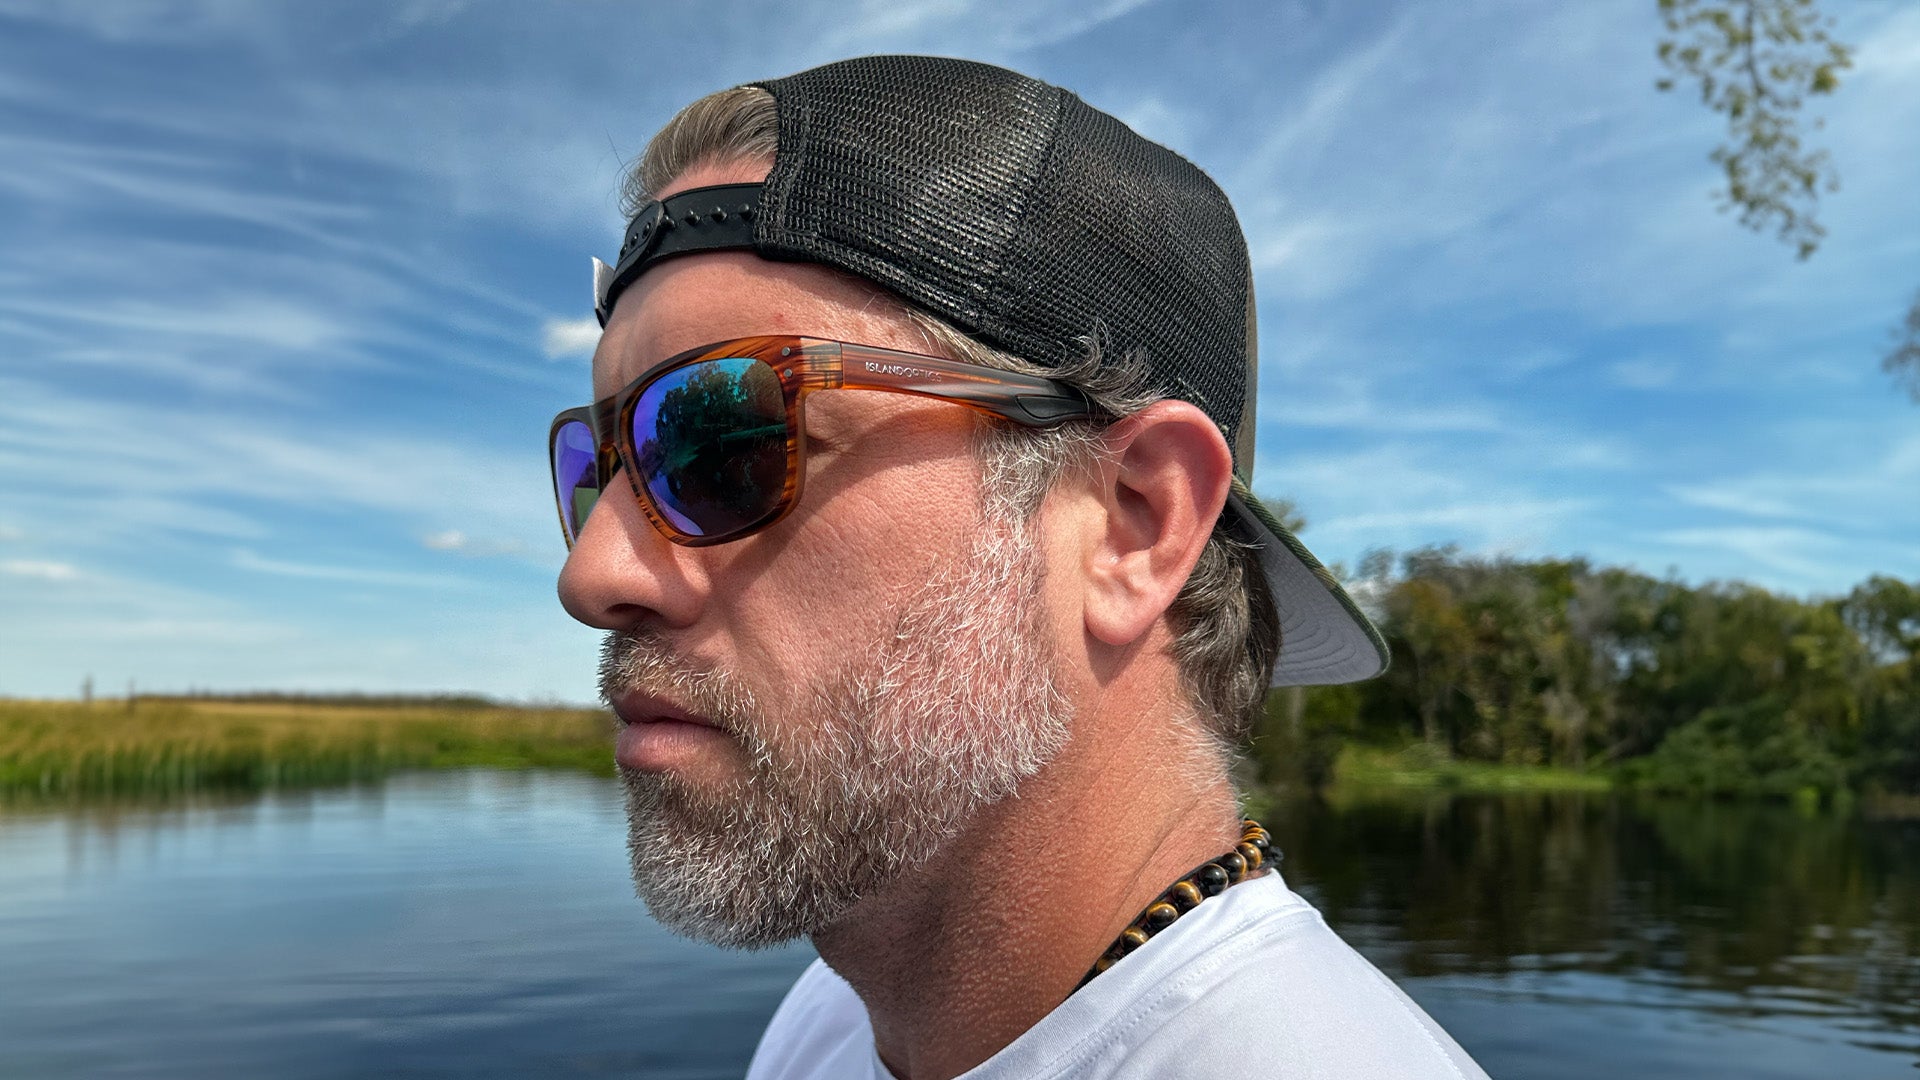 Angler wearing polarized fishing sunglasses, focusing on a clear view of the water while casting a fishing rod on a sunny day.